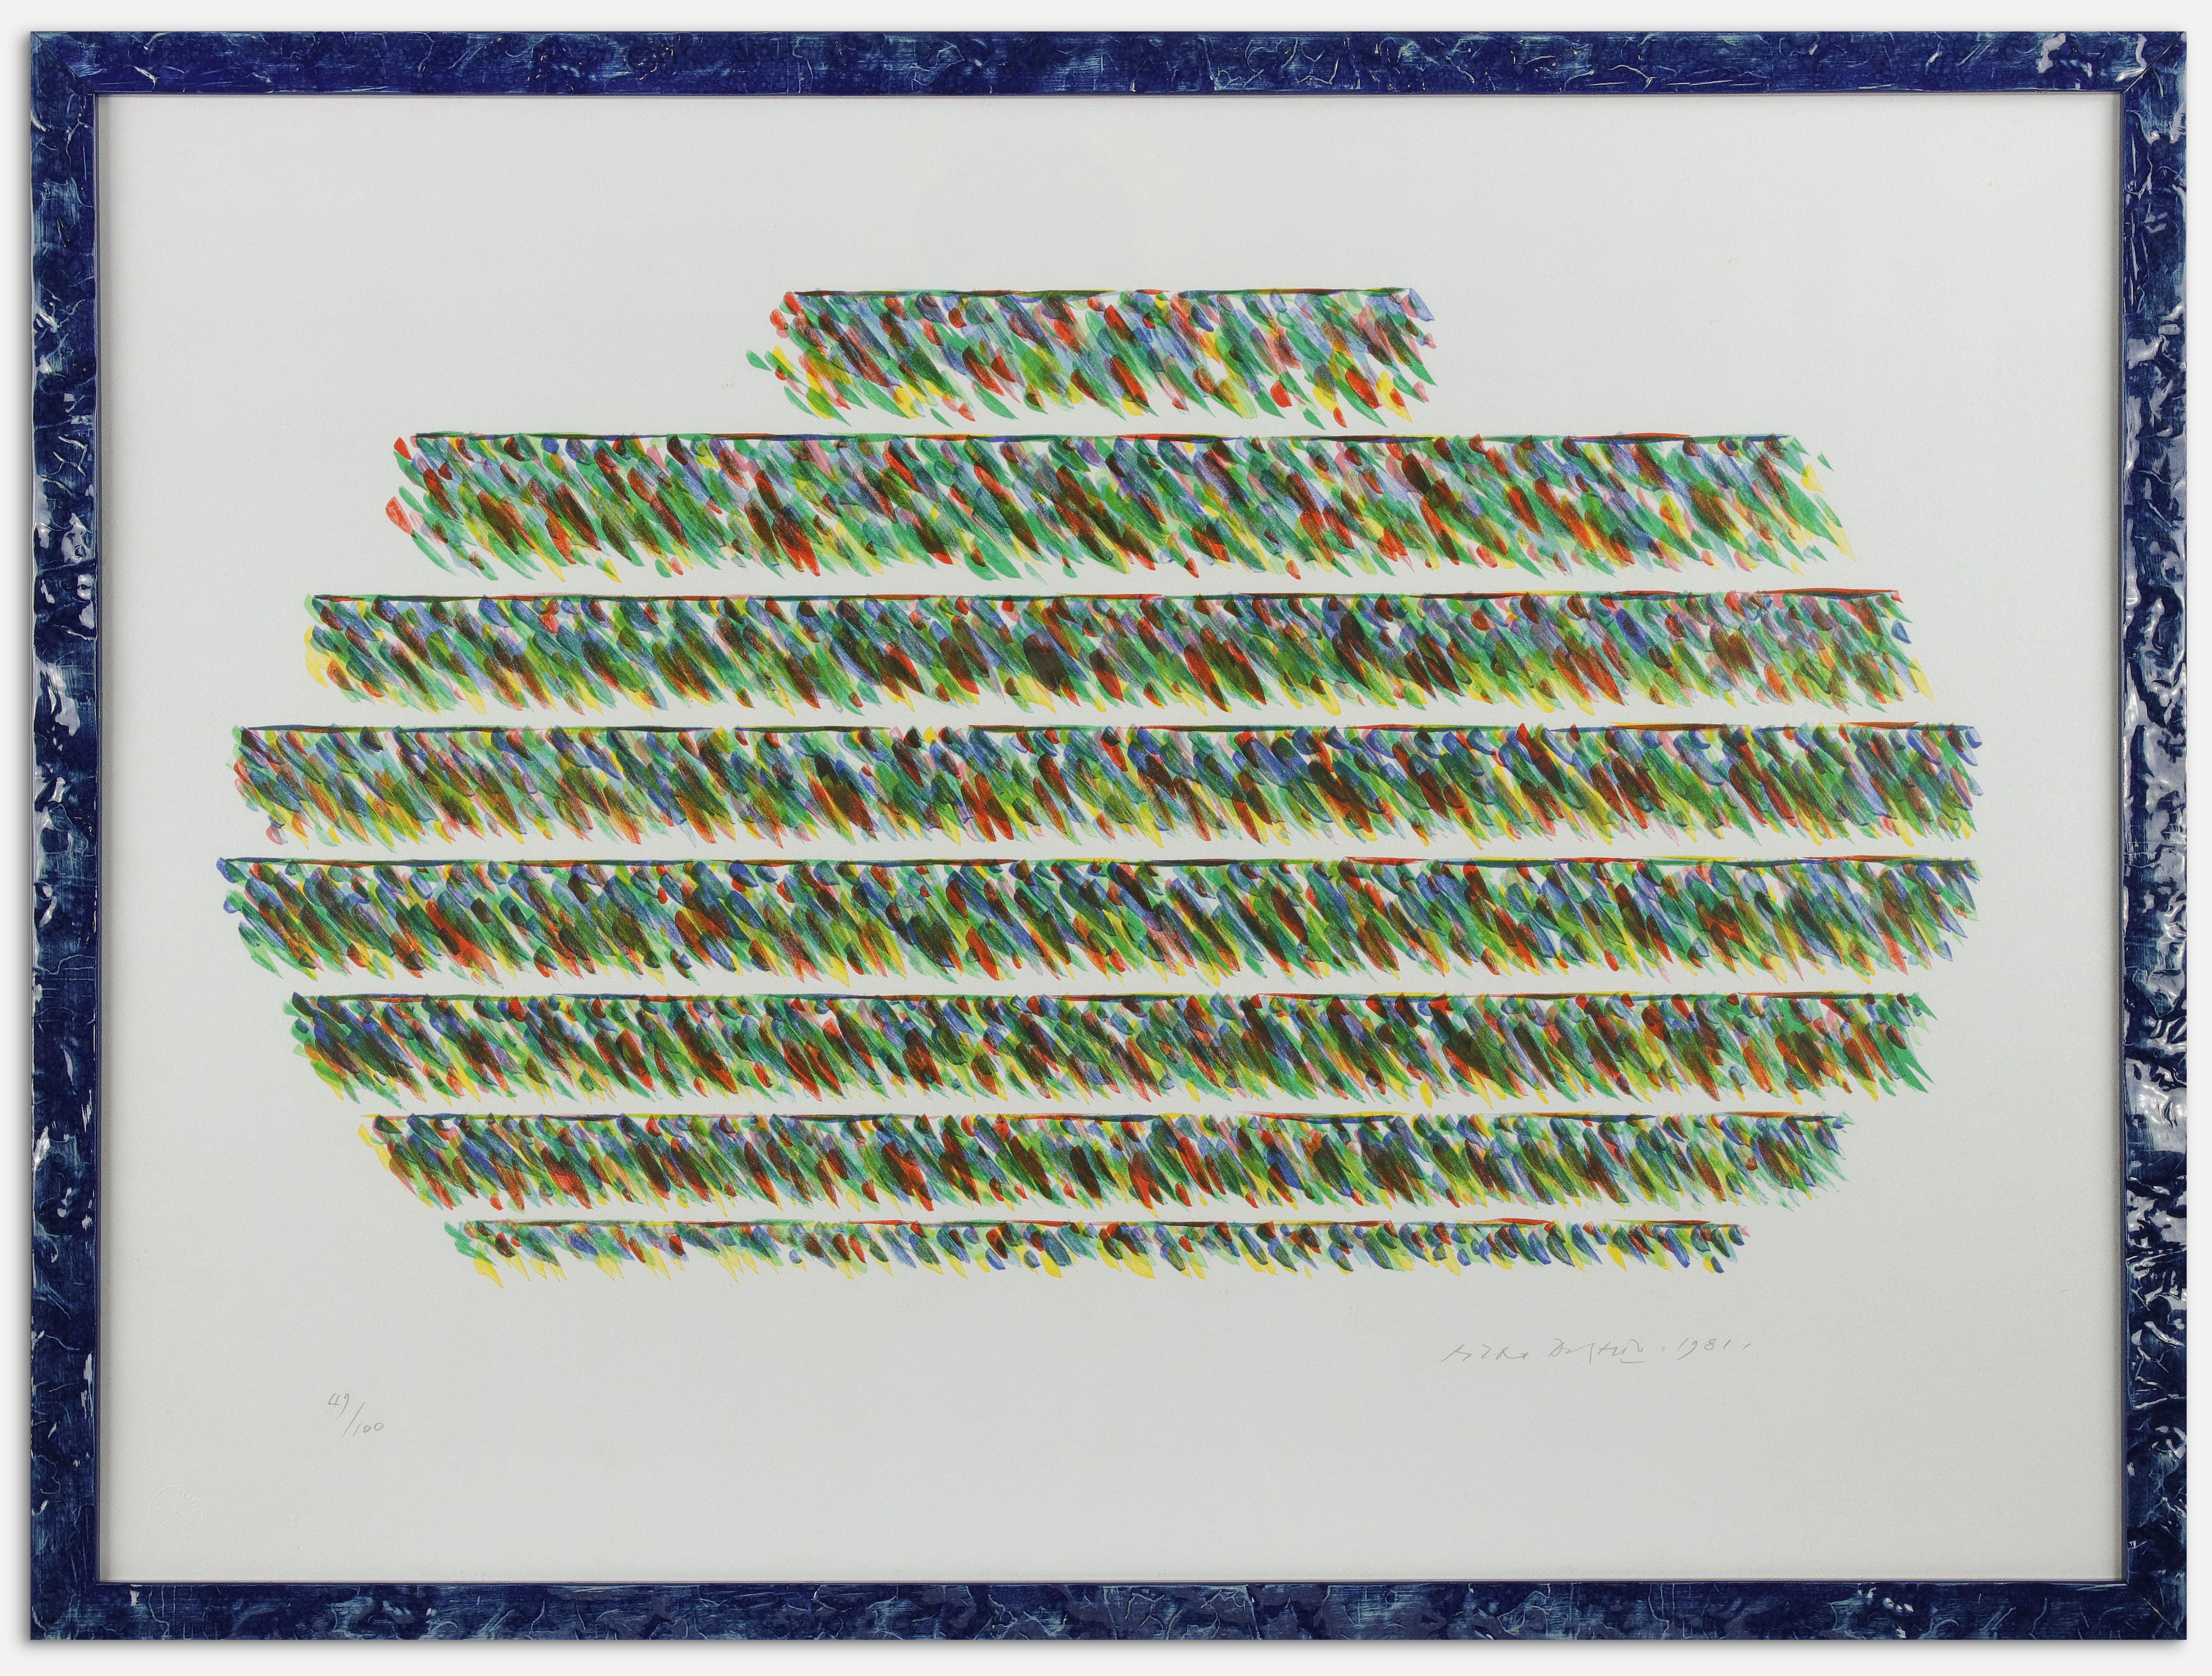 Alisei is an original artwork, a colorful lithograph on paper, realized by Piero Dorazio in 1981.

Hand-signed and dated by the artist in pencil on the lower right. Numbered on the lower left. Edition of 100. Dry stamp Erker Presse San Gallo on the